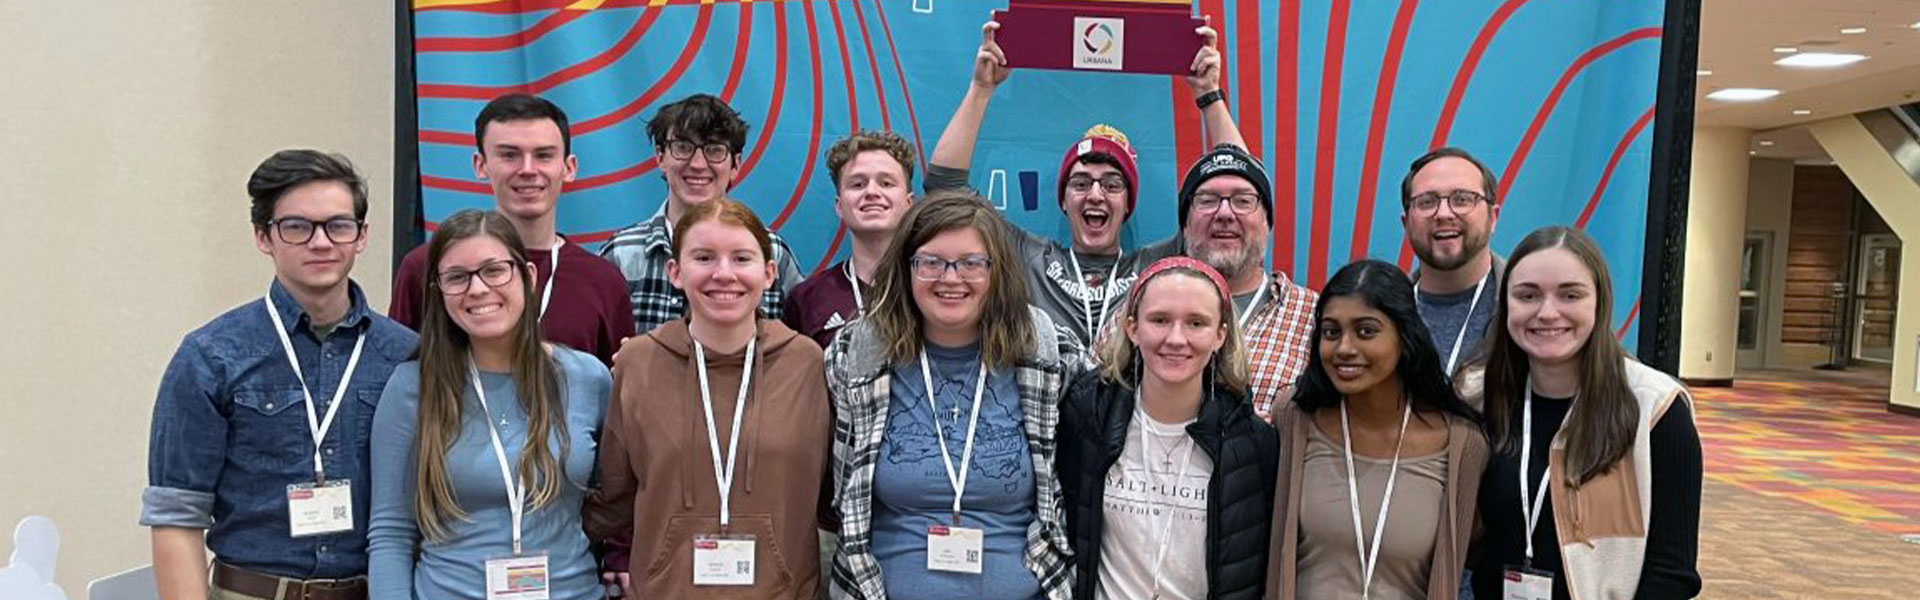 Student Christian Fellowship

SUPPORT STUDENTS TO REACH THEIR COMMUNITY.

Student Christian Fellowship has chapters at the University of Southern Indiana and the University of Evansville. They are a student organization...
